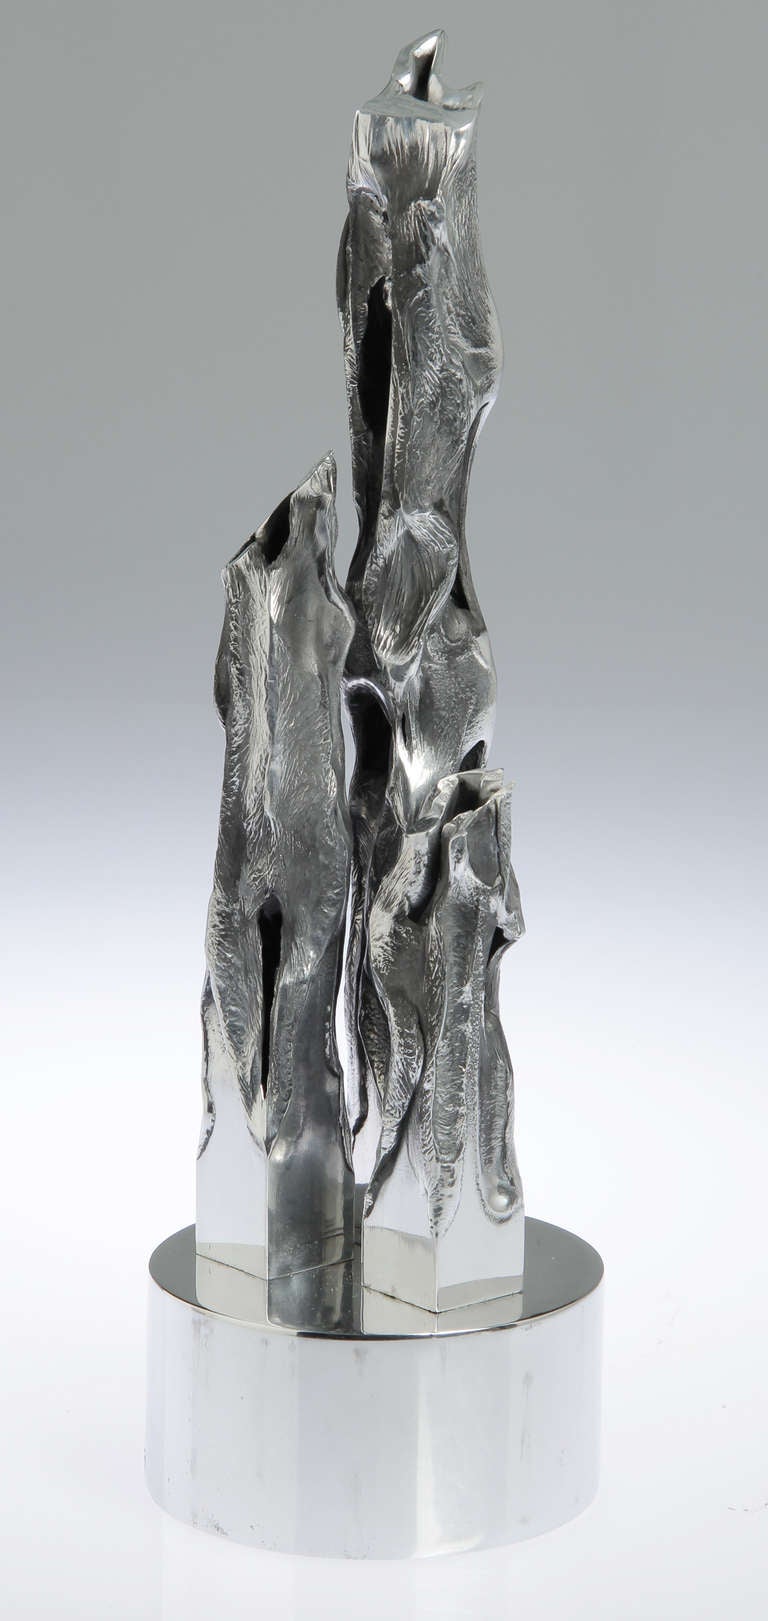 This is an interesting brutalist sculpture, having three flame like
elements. Signed Hibben 71 on the base.